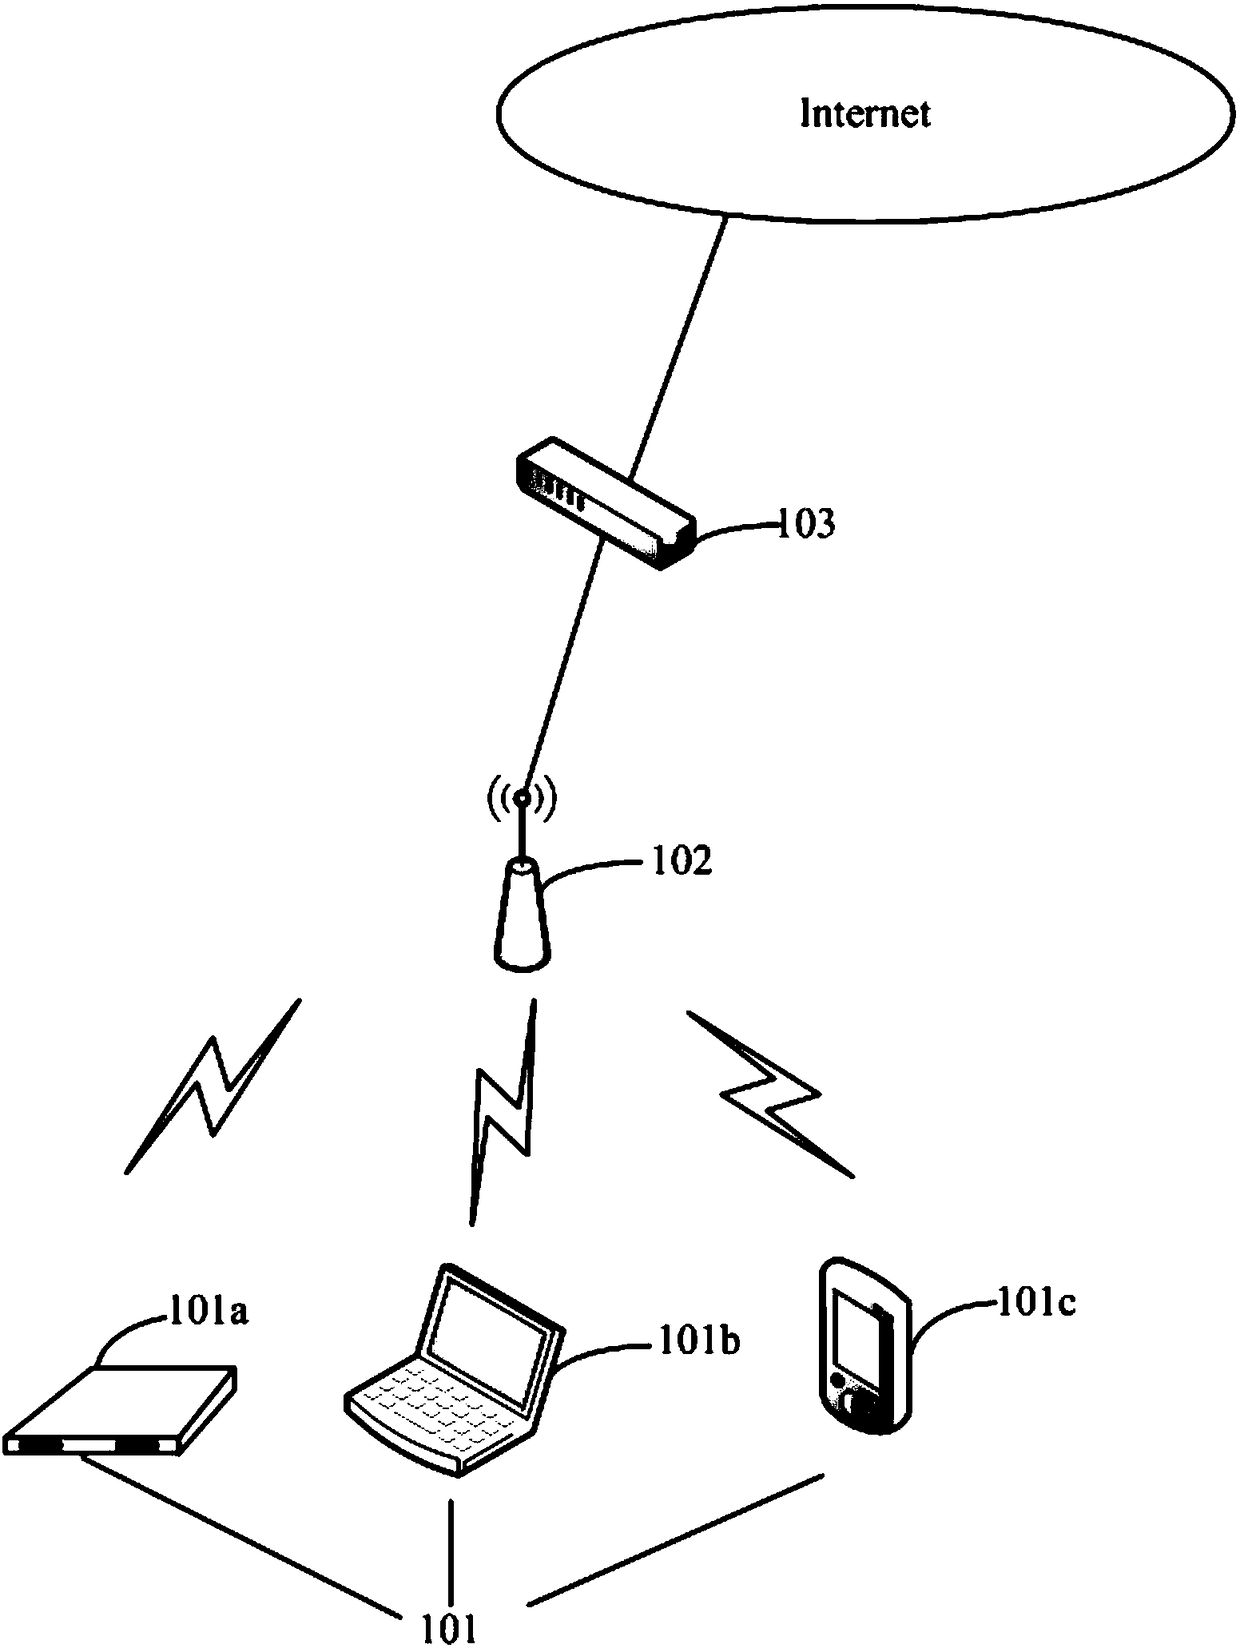 Wi-Fi access method and device